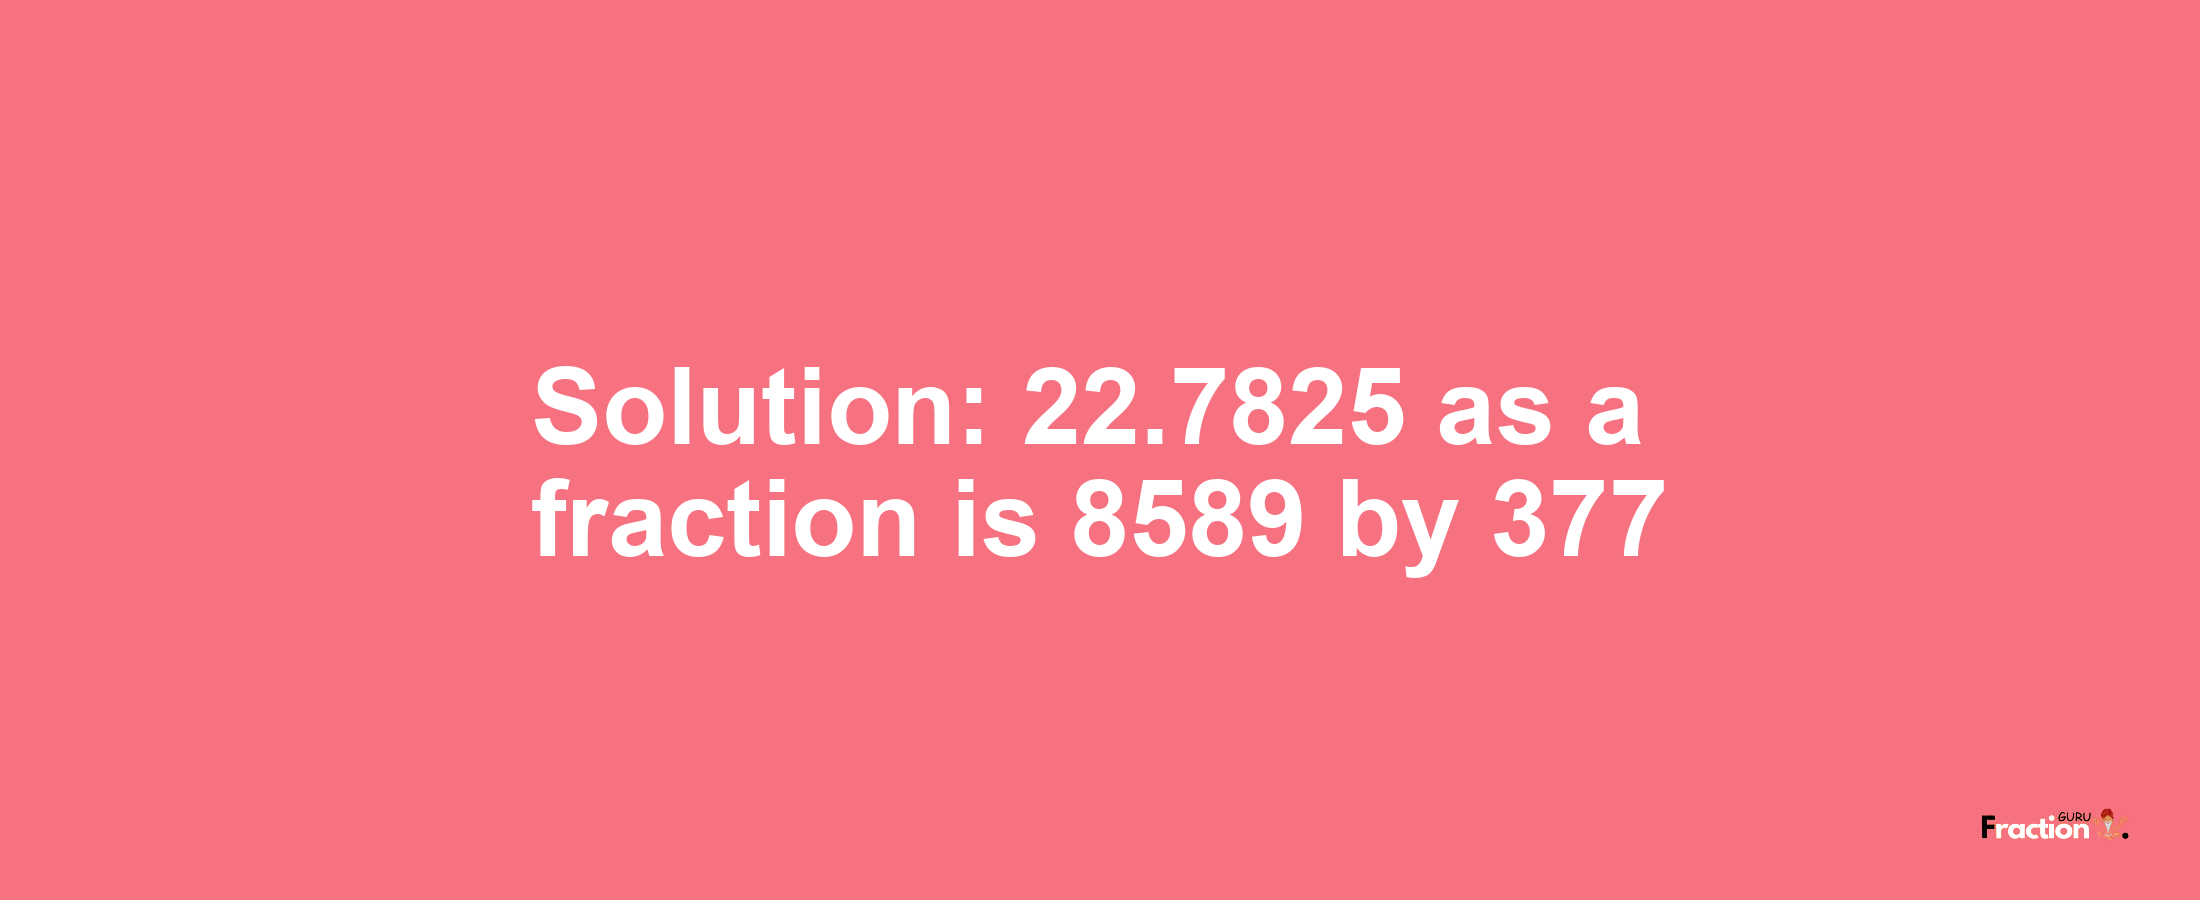 Solution:22.7825 as a fraction is 8589/377